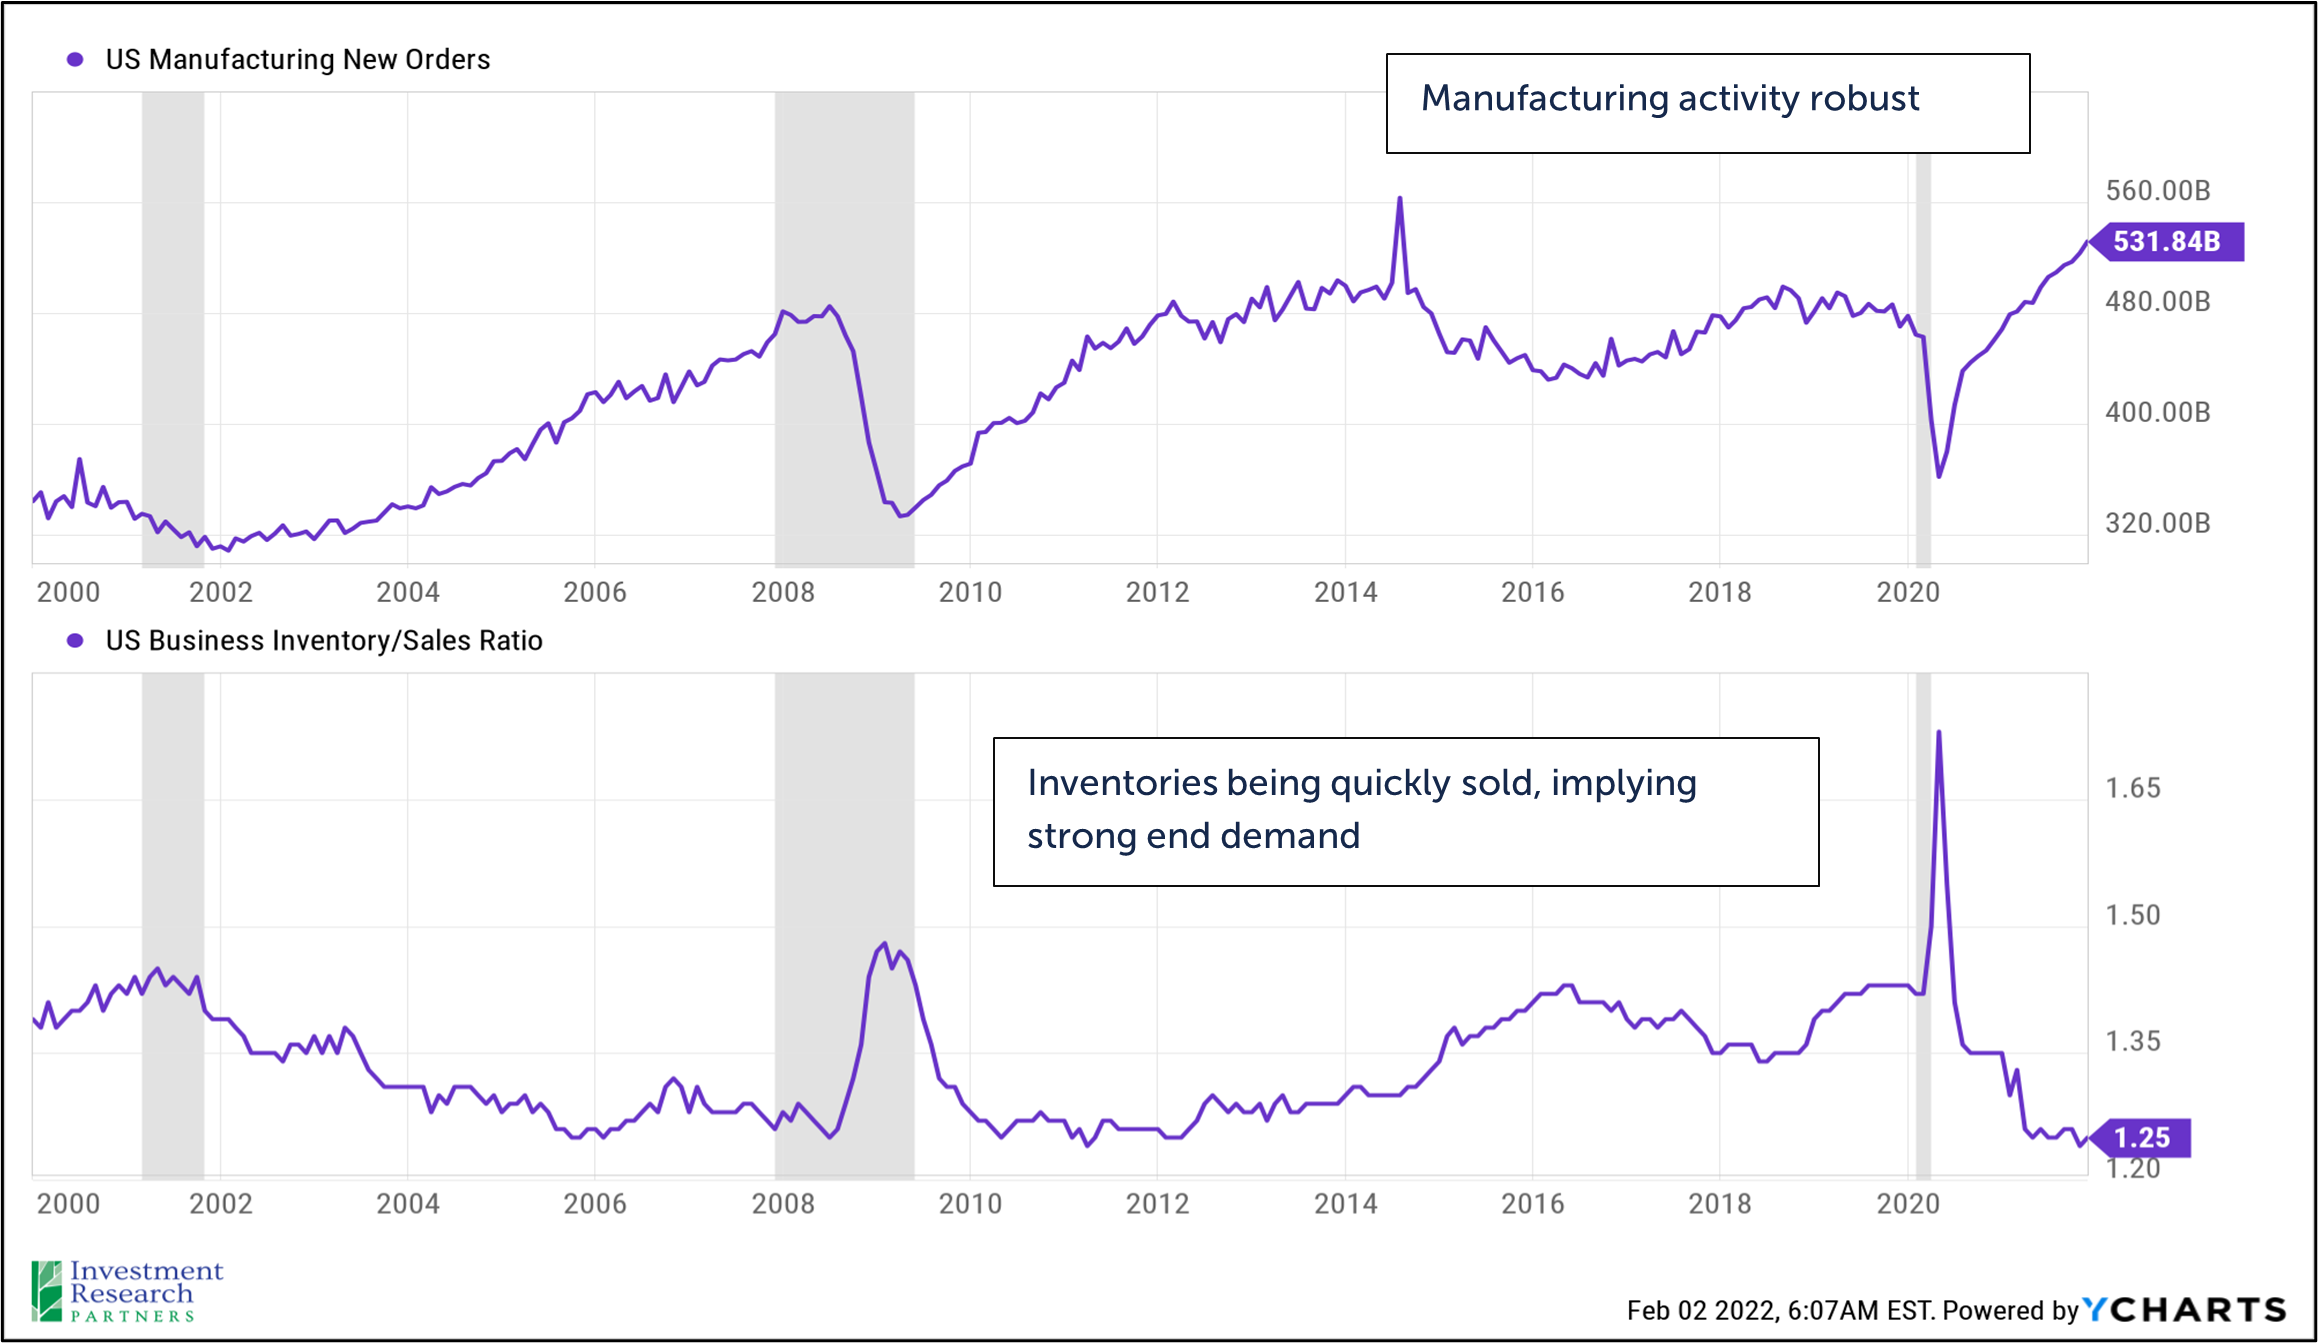 Line graphs depicting US Manufacturing New Orders and US Business Inventory/Sales Ratio